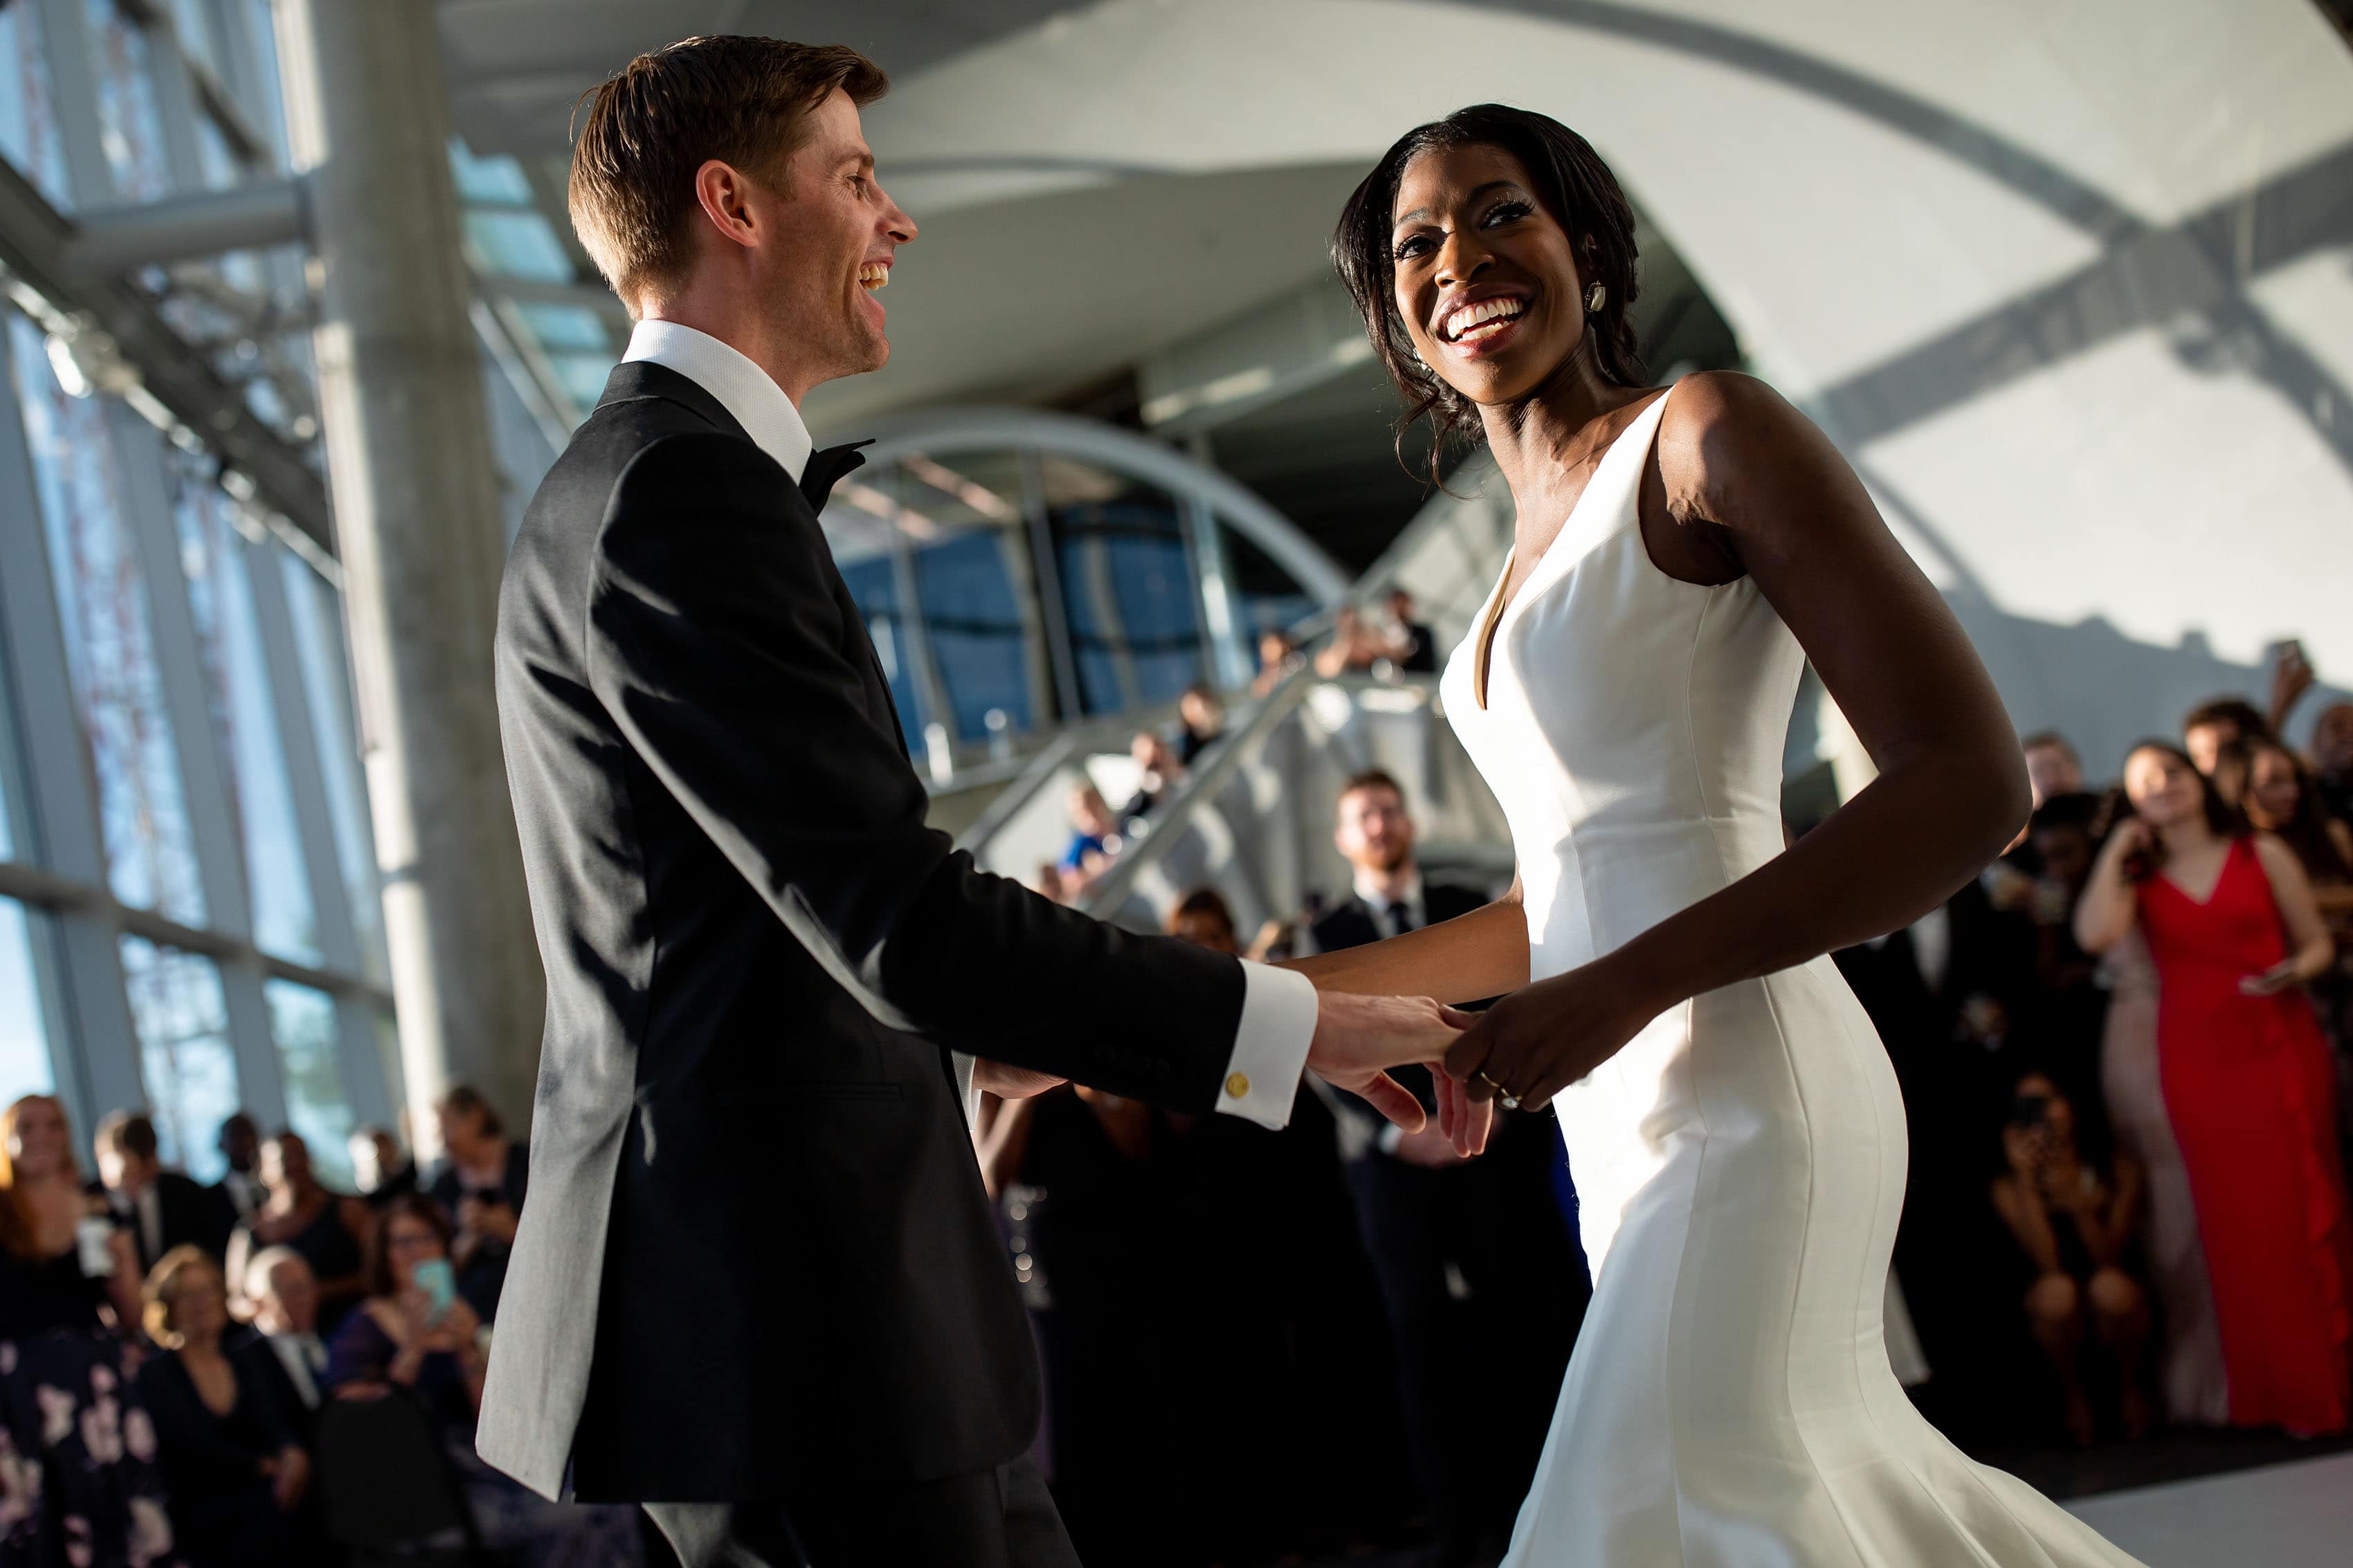 Newlyweds share their first dance in the Denver Museum of Nature and Science